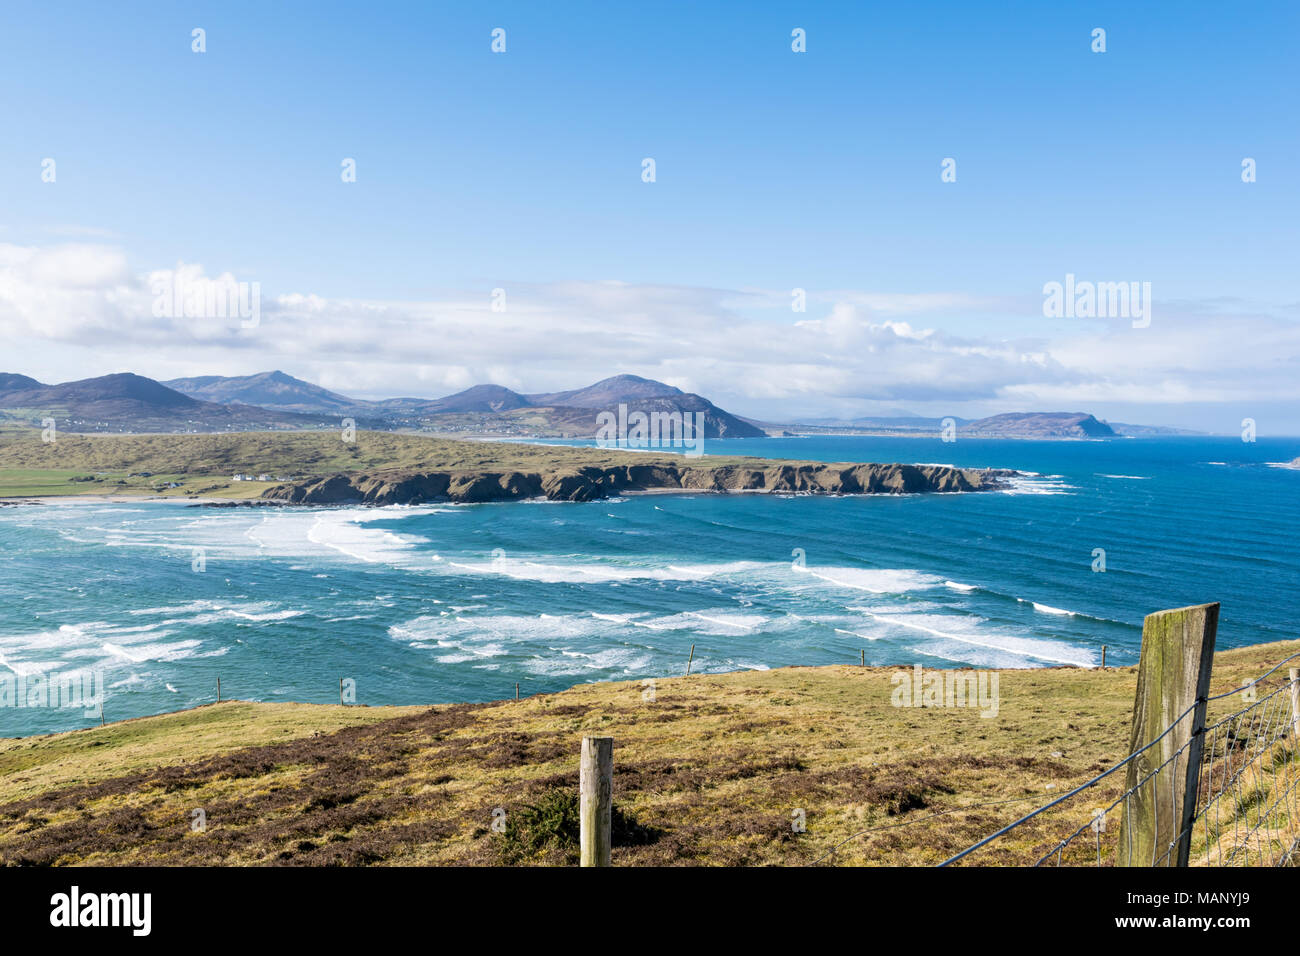 A view of the Irish coastline near Malin in county Donegal Ireland.  just beyond the ocean waves you can see sea cliffs and the mountains Stock Photo